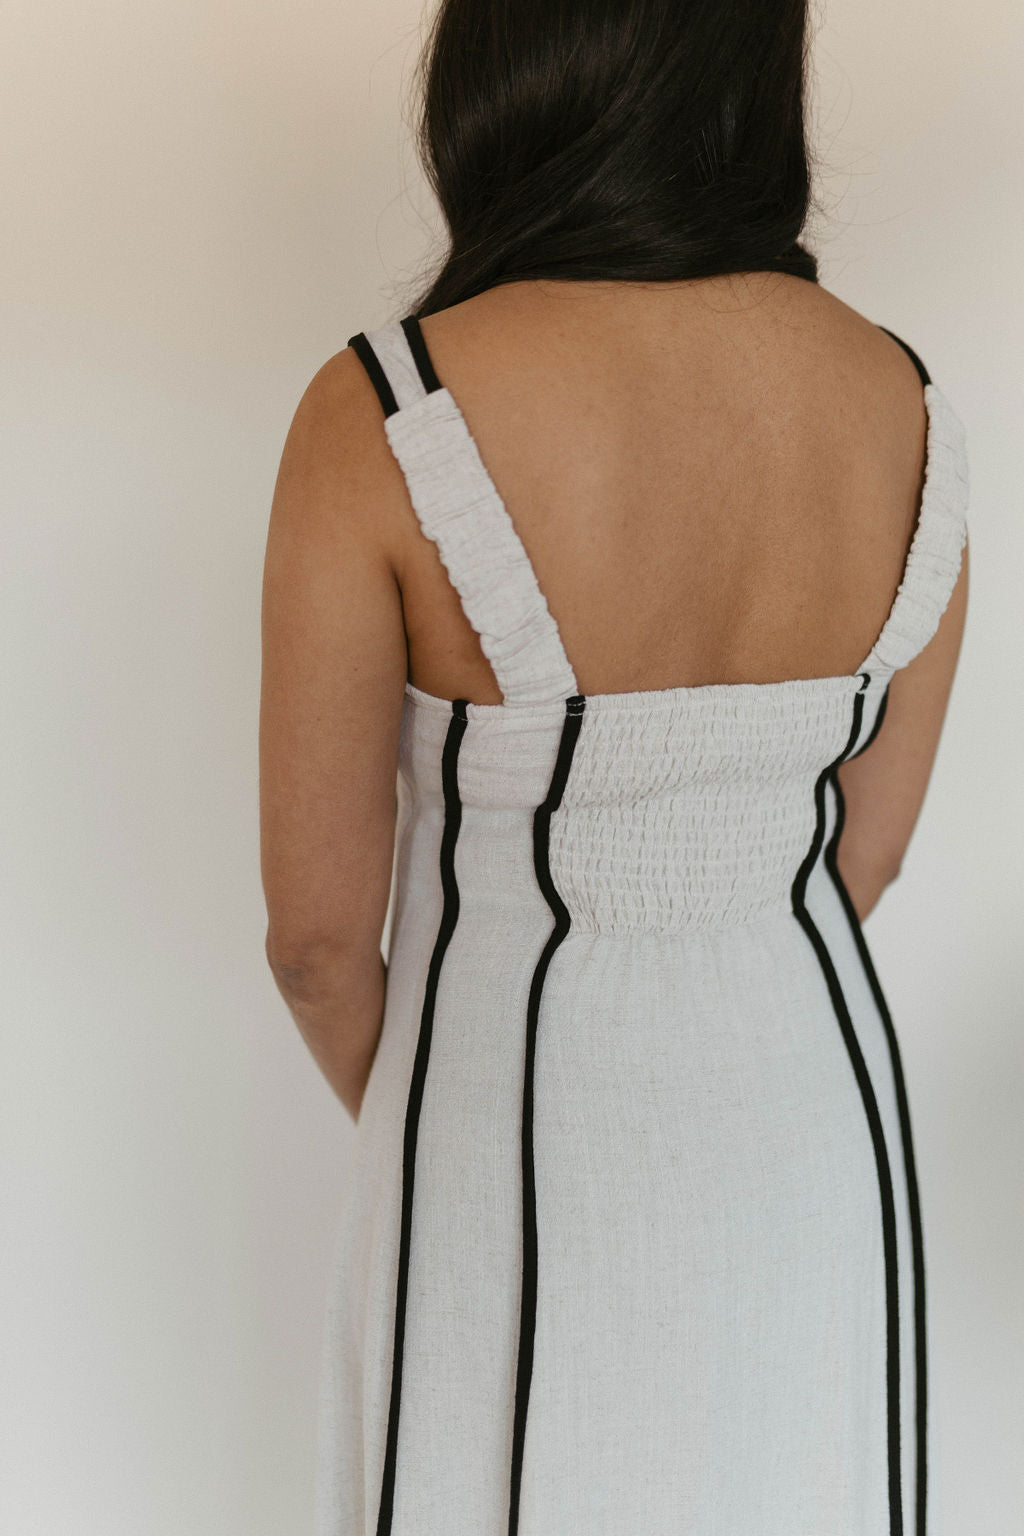 dress with piping detail